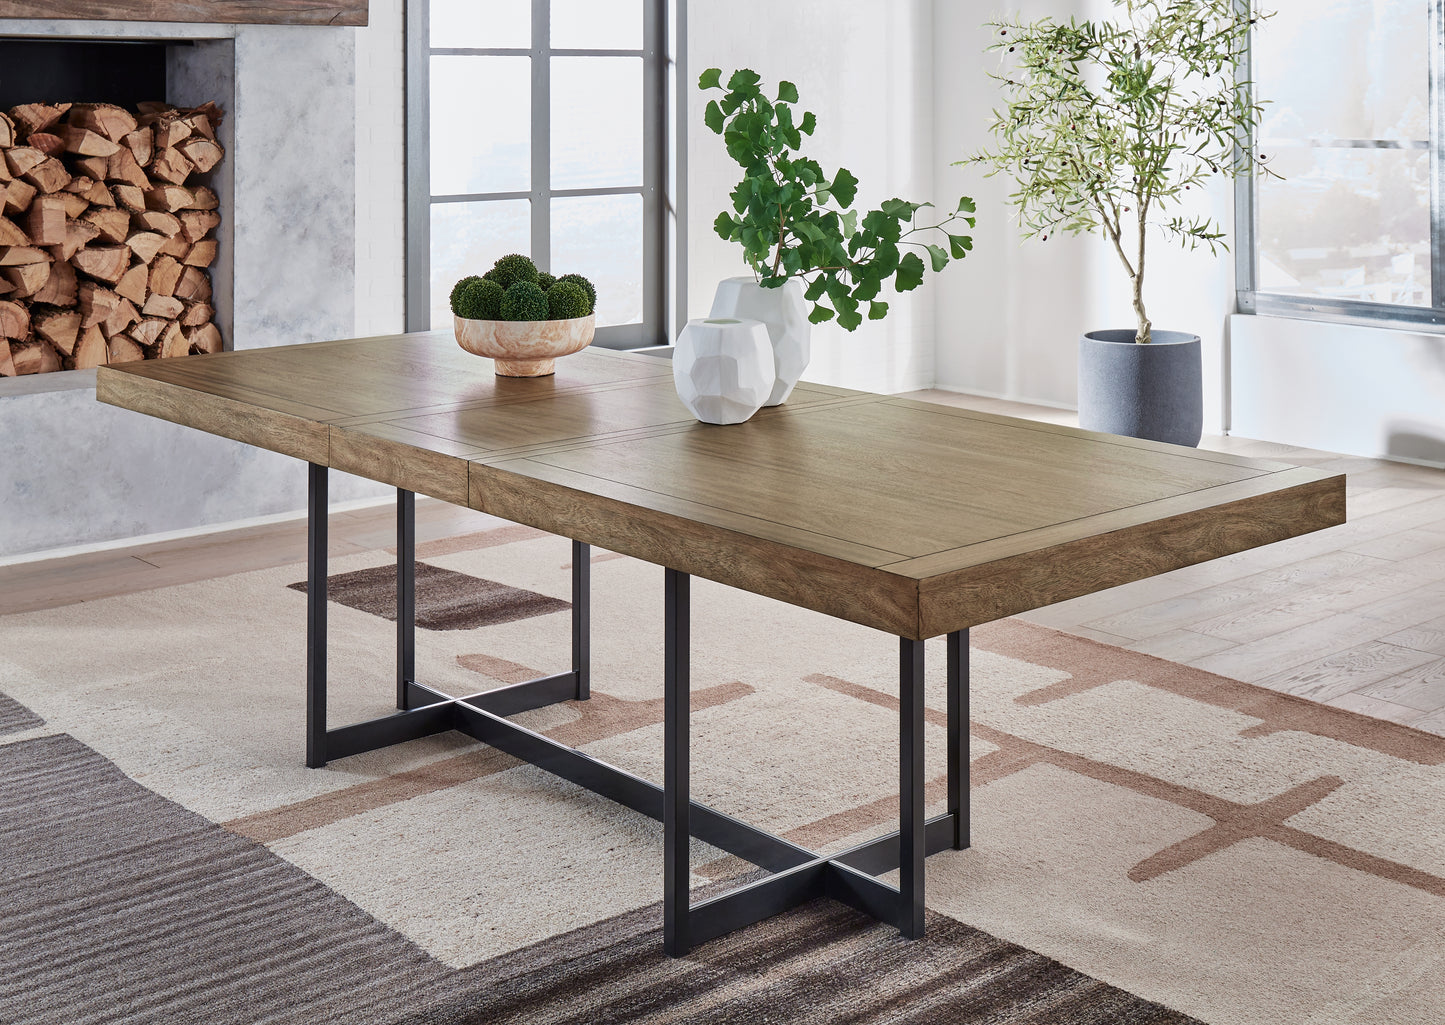 Tomtyn Dining Extension Table